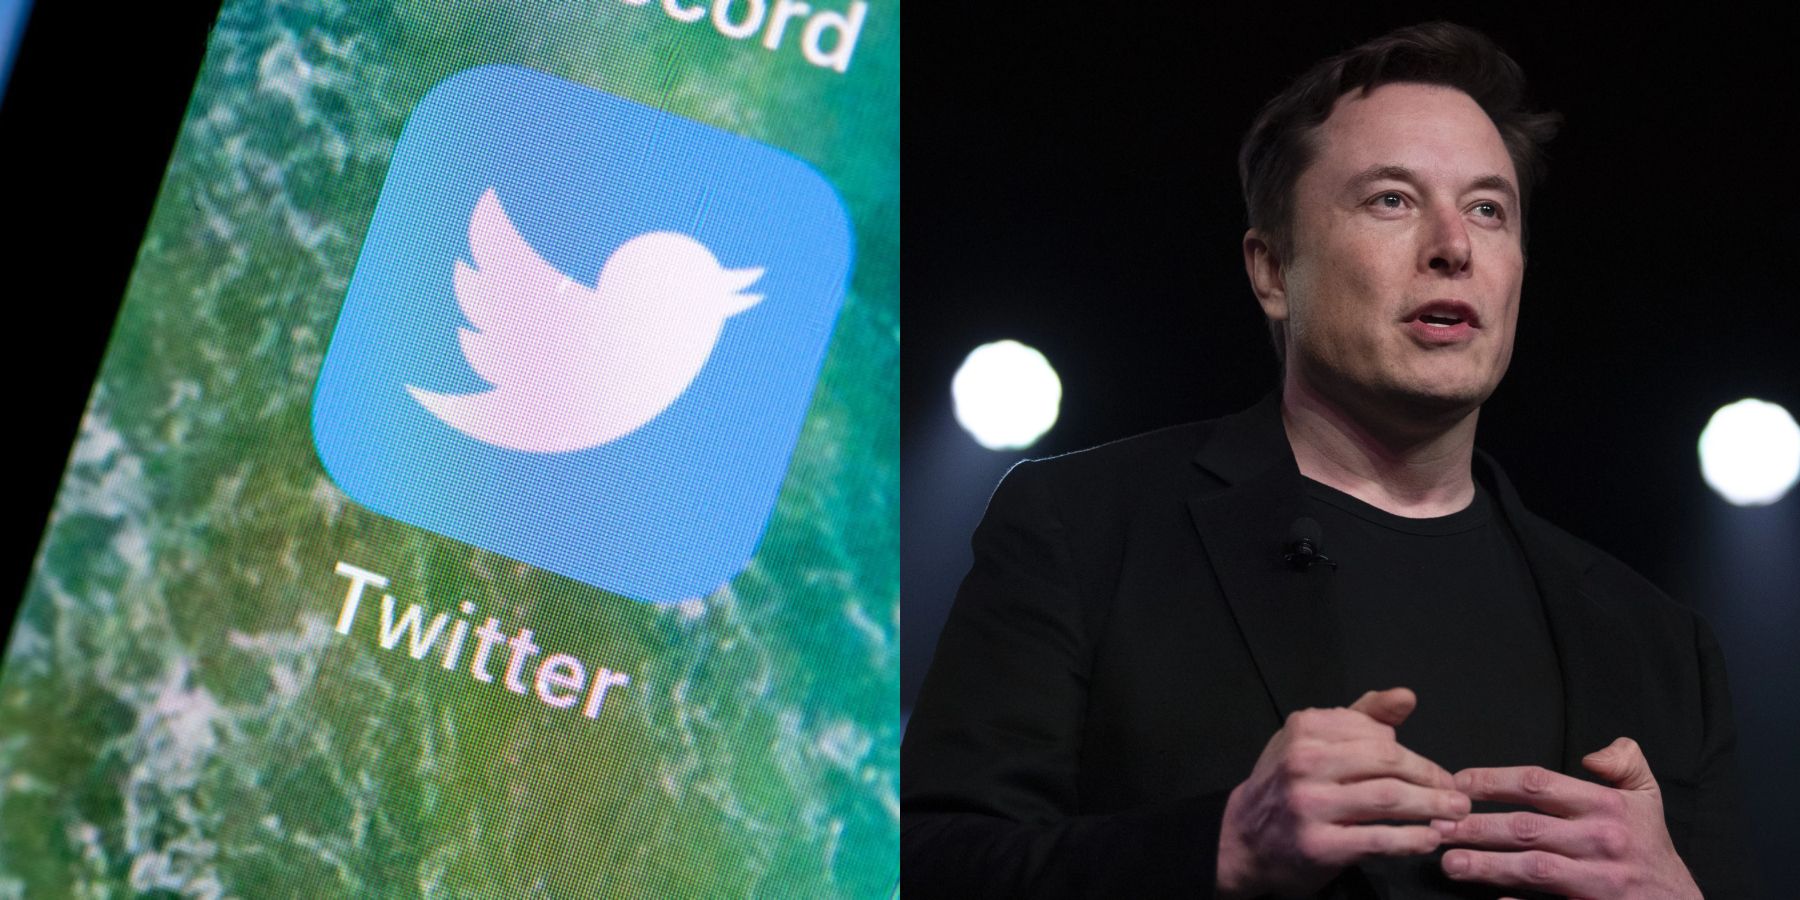 Twitter Plans to Sue Elon Musk After He Backs Out of Deal